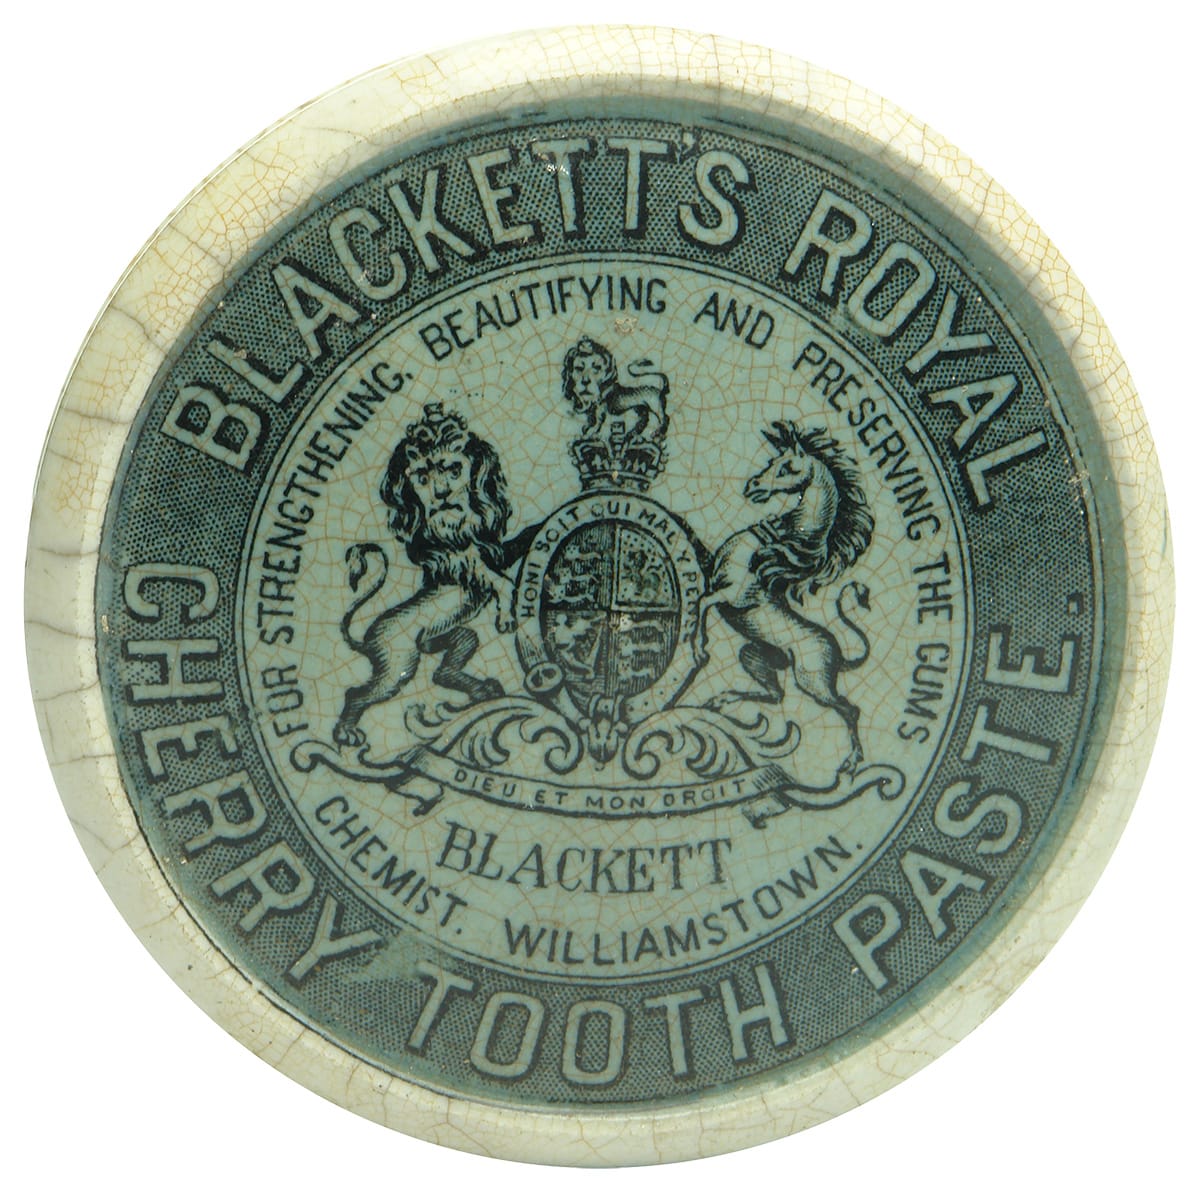 Blackett's Royal Tooth Paste Williamstown Pot Lid